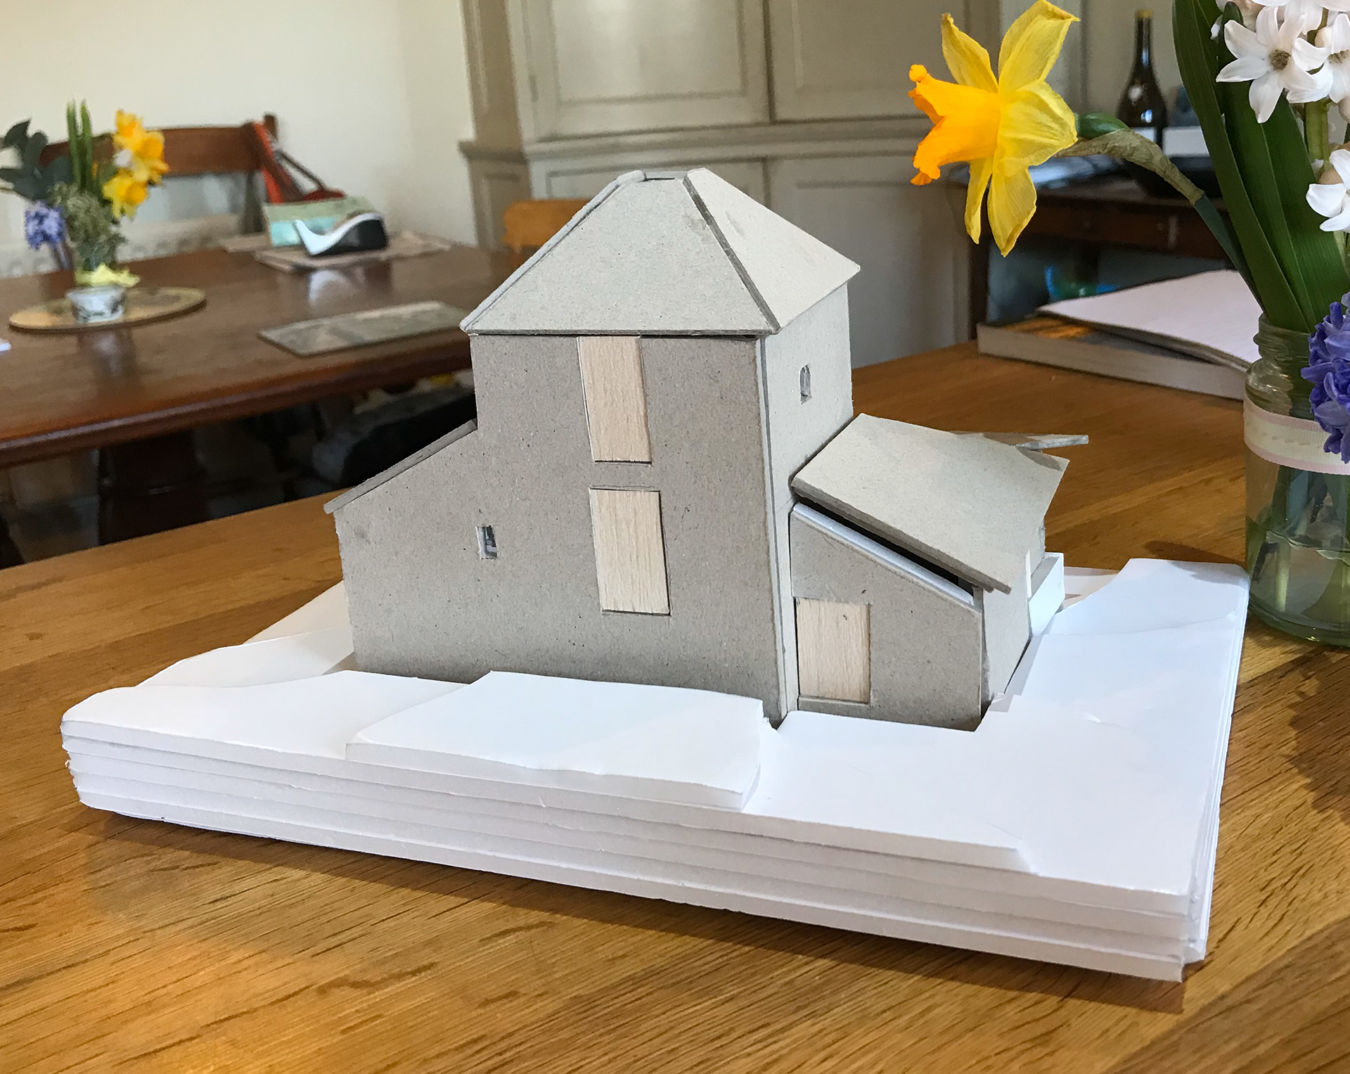 Artictects model of the Dovecot at Reedsford showing the from elevation